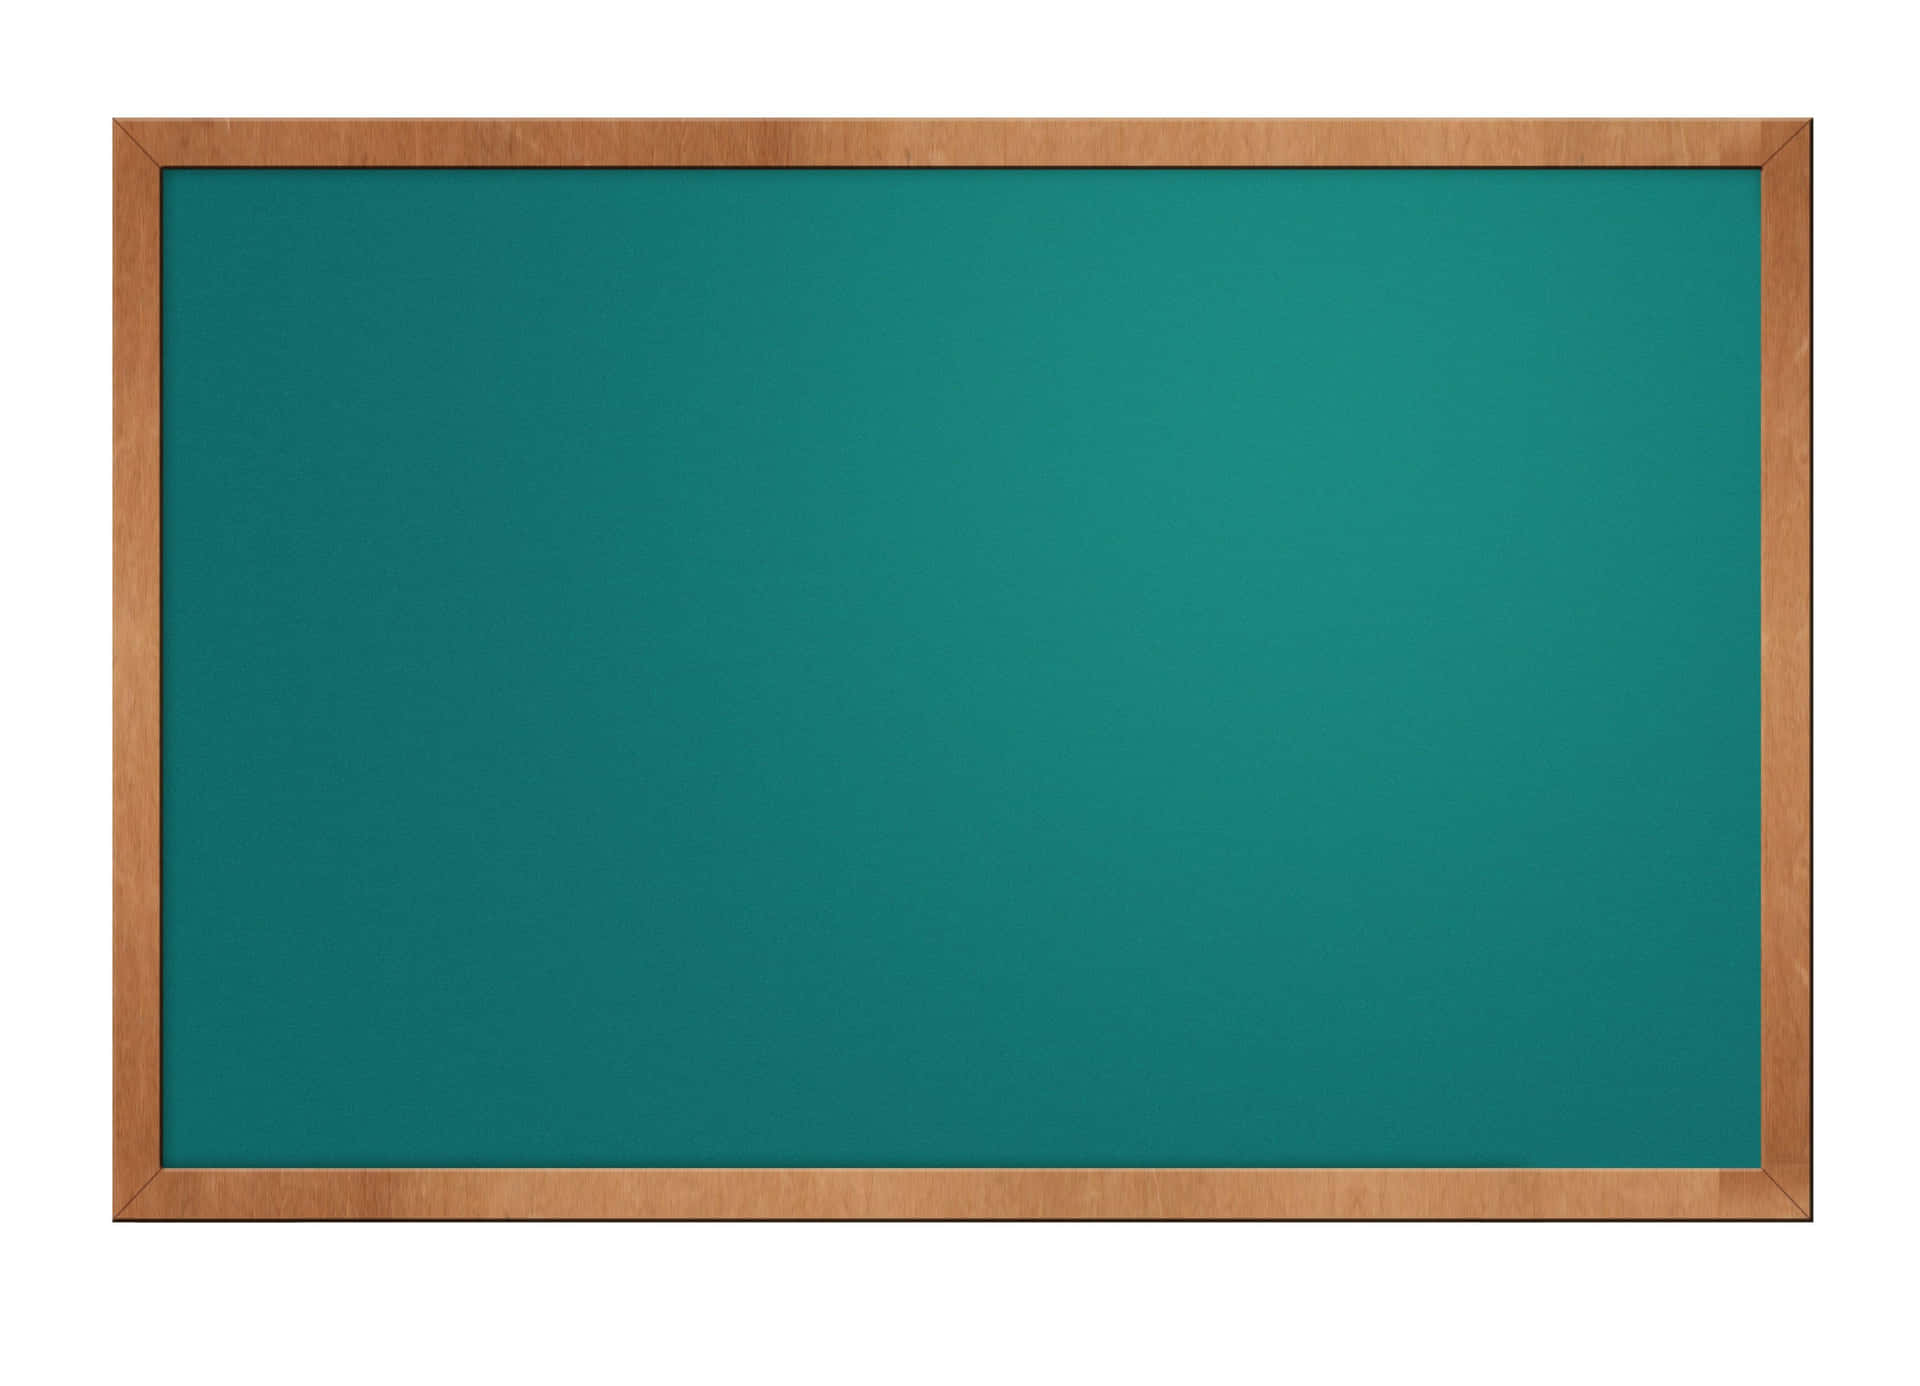 Teal Blackboard Frame Classroom Picture